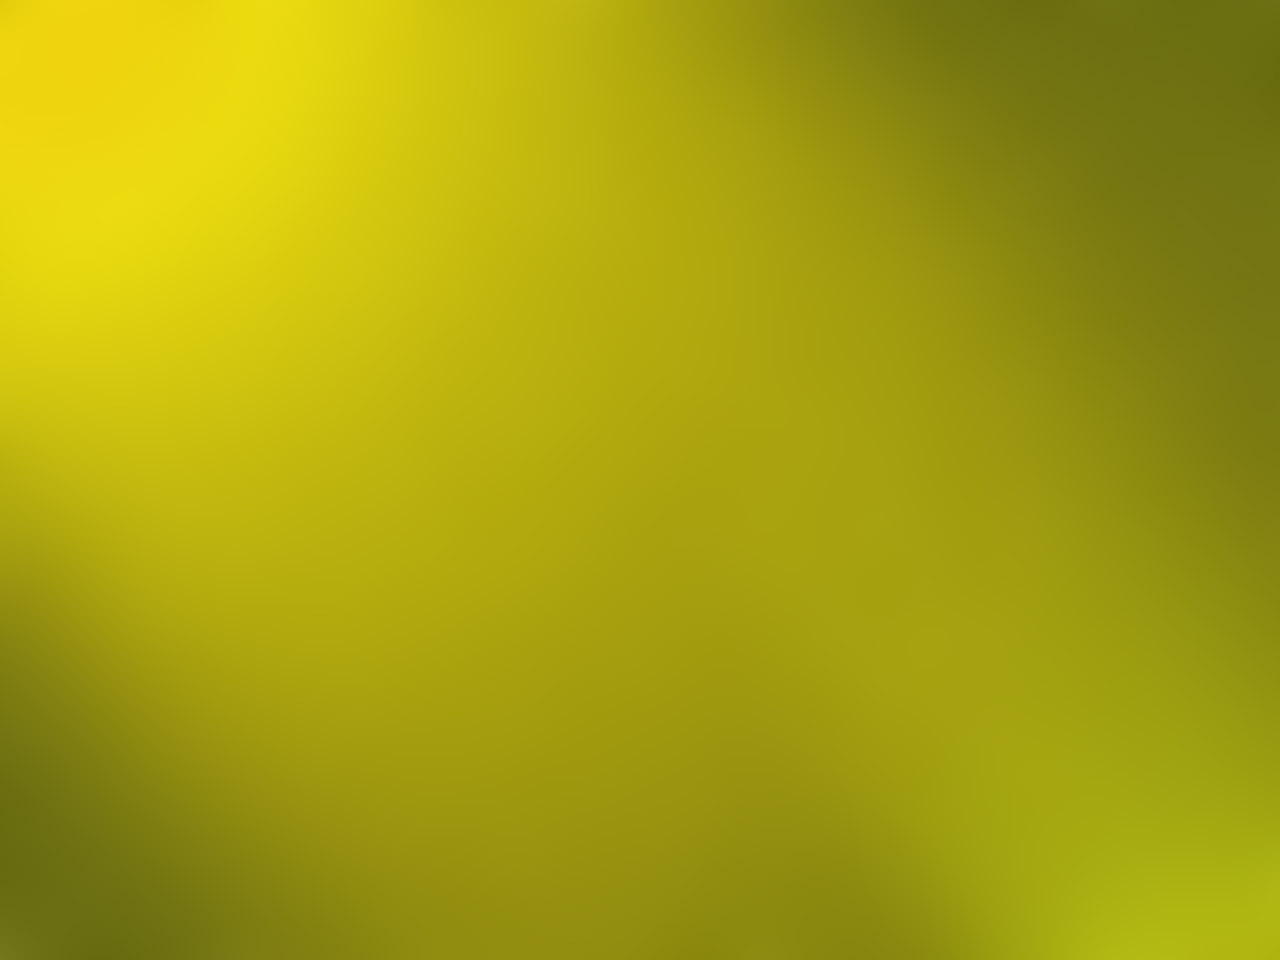 abstract_background_yellow.jpg - 29.12 kB